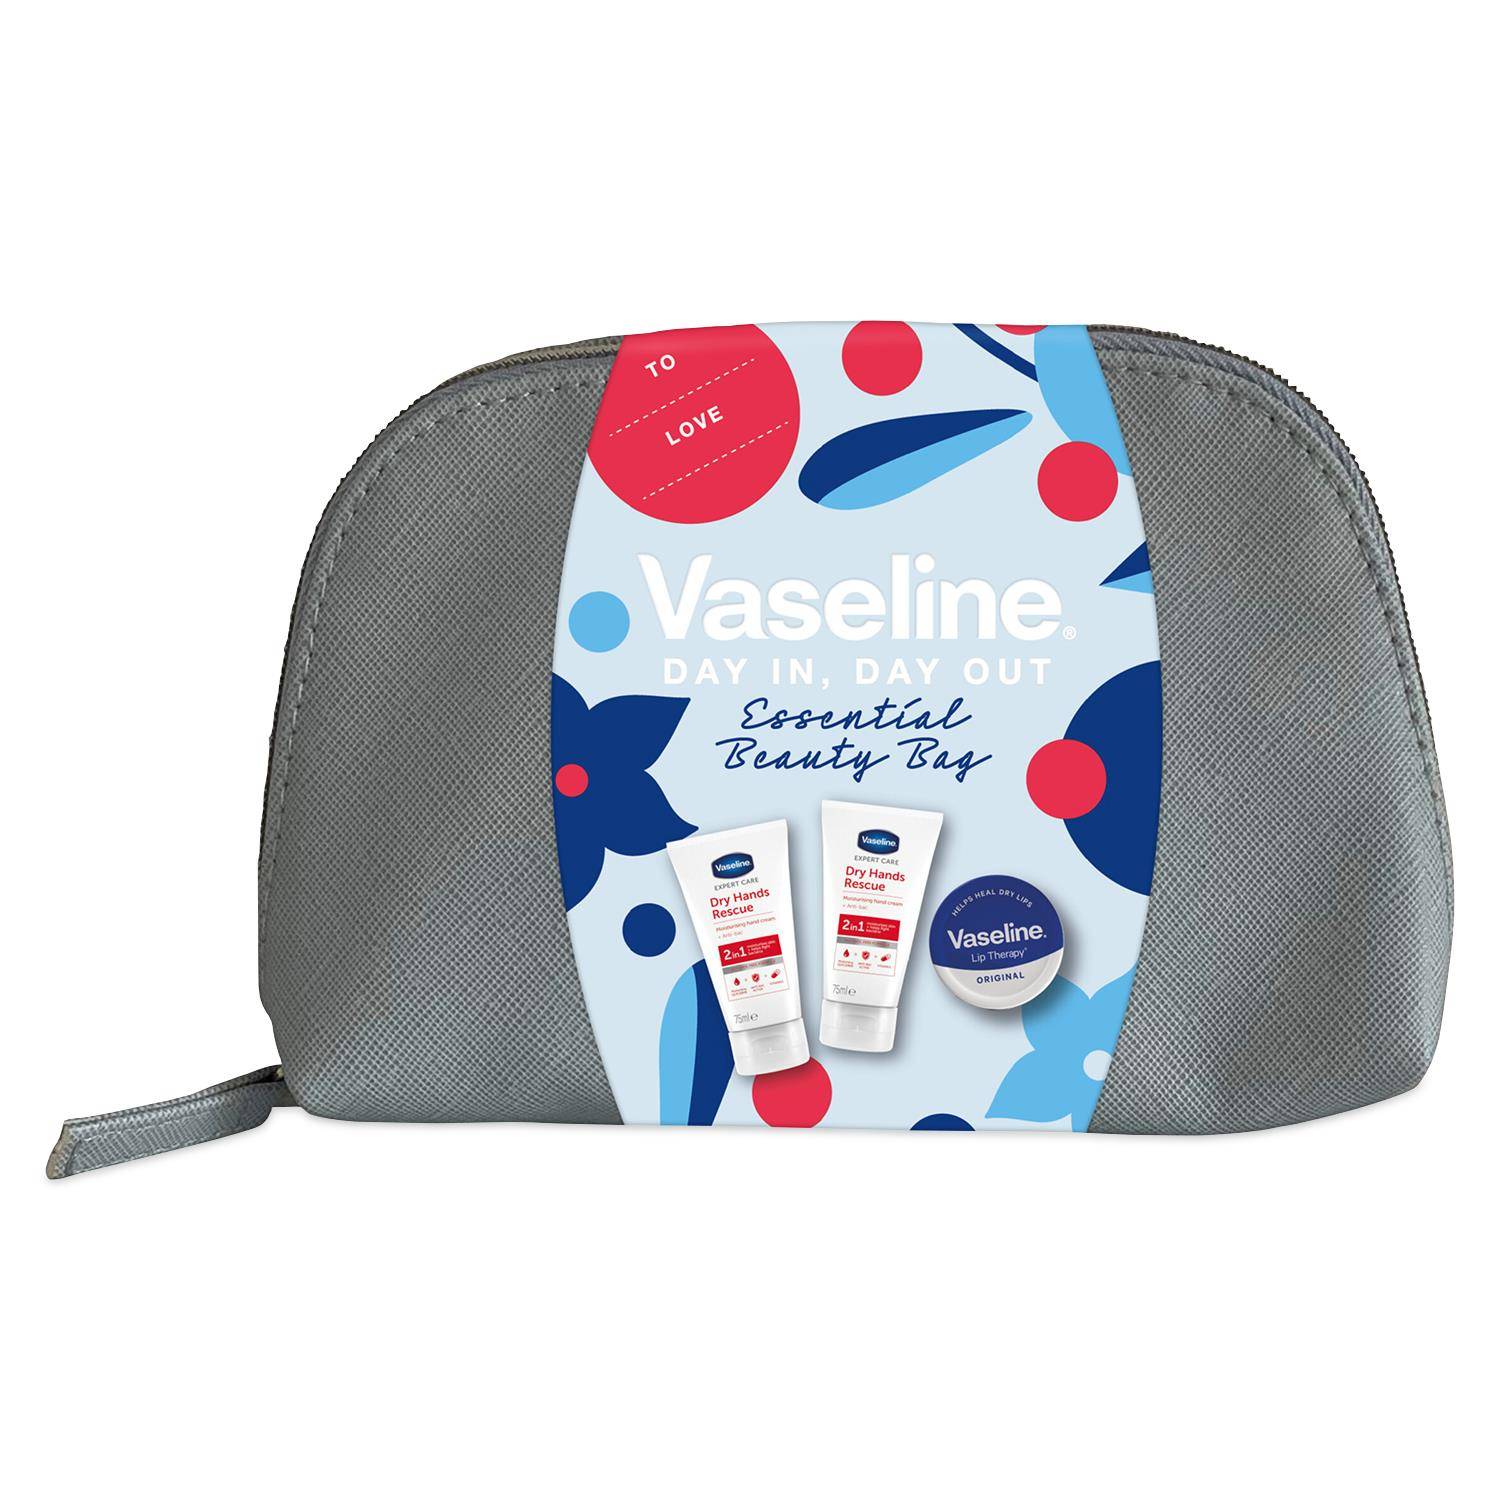 Vaseline Day In Day Out Hand & Lip Care Essentials Beauty Bag 3pcs Gift Set